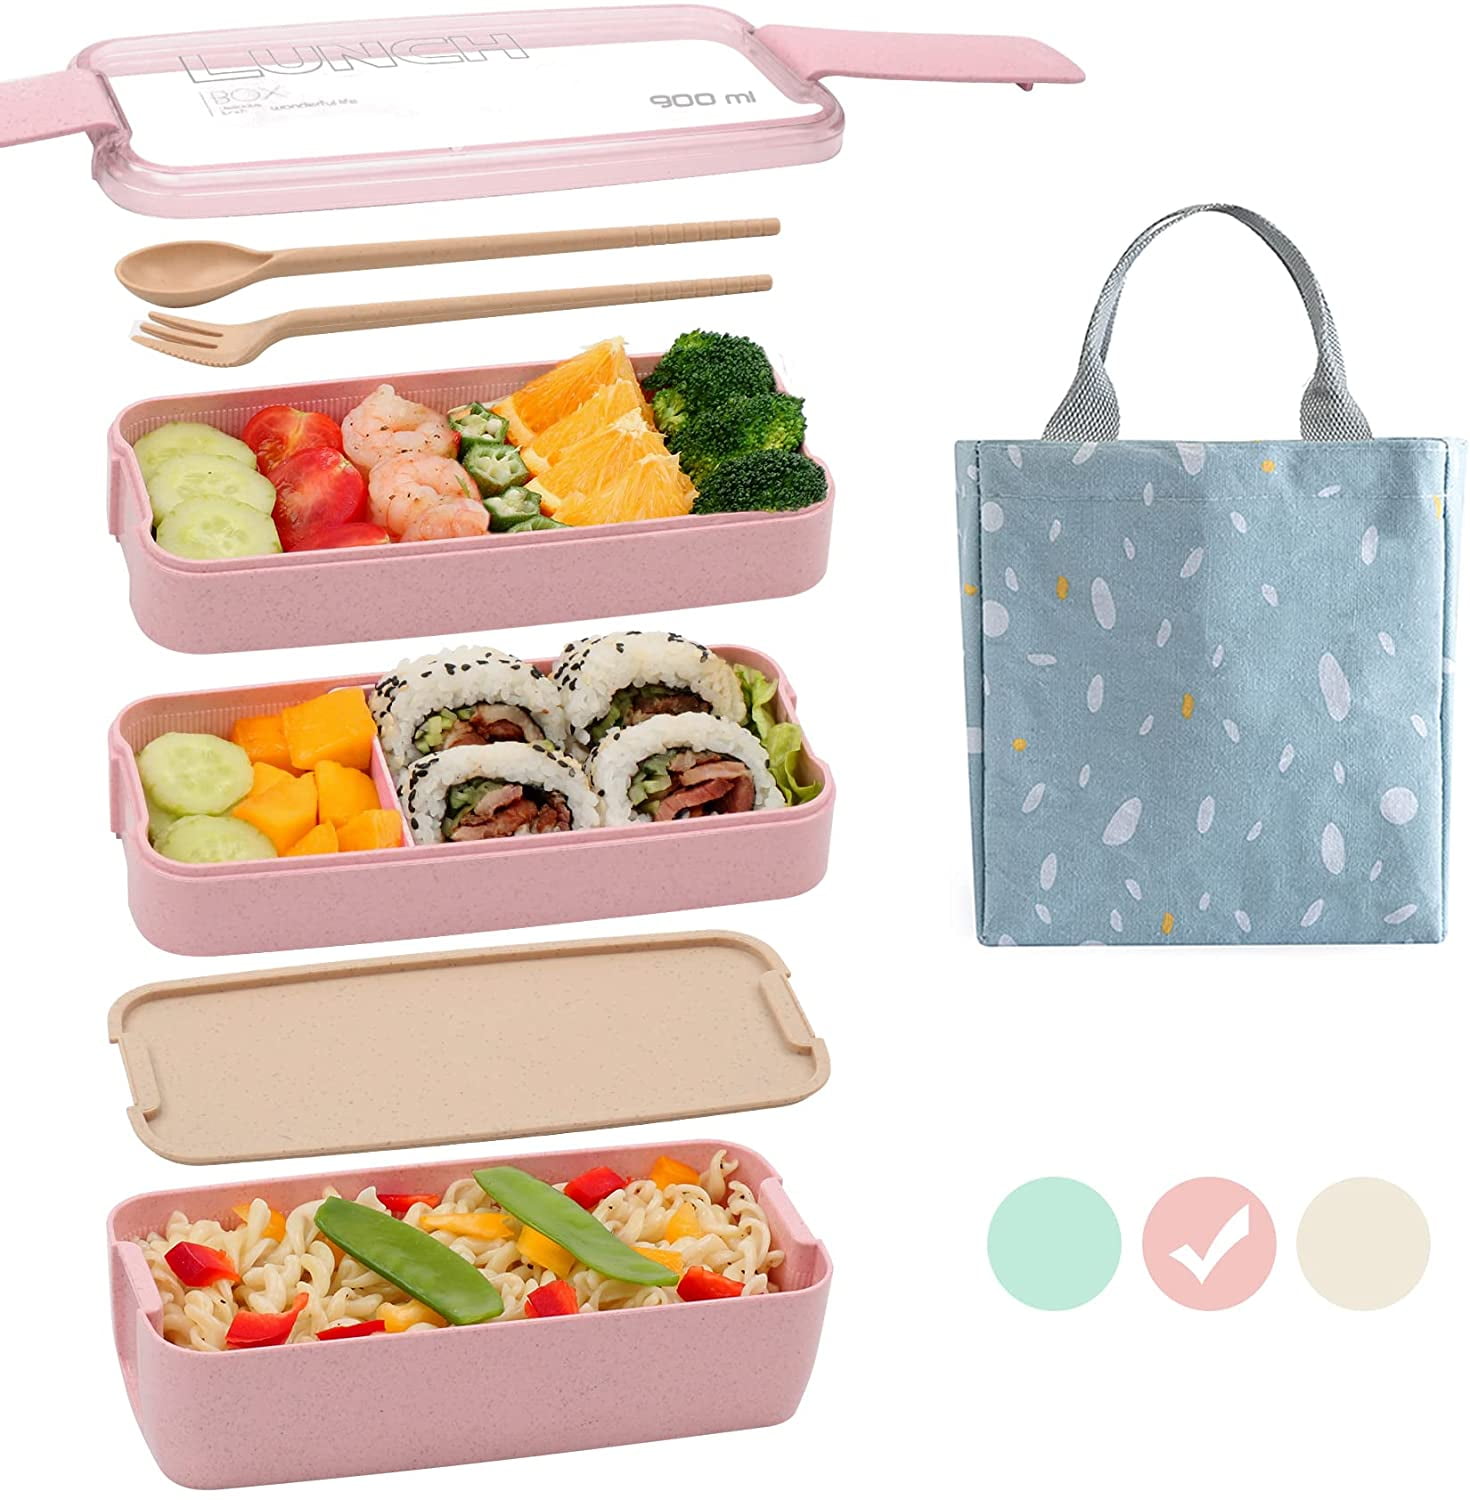  Meltset M 35Pcs Bento Box Japanese Lunch Box Kit Leakproof Bento  Lunch Box for Kids Adults Wheat Straw 3 Layer Stackable Lunch Containers  with Compartment Eco-Friendly Meal Prep Containers (Beige): Home